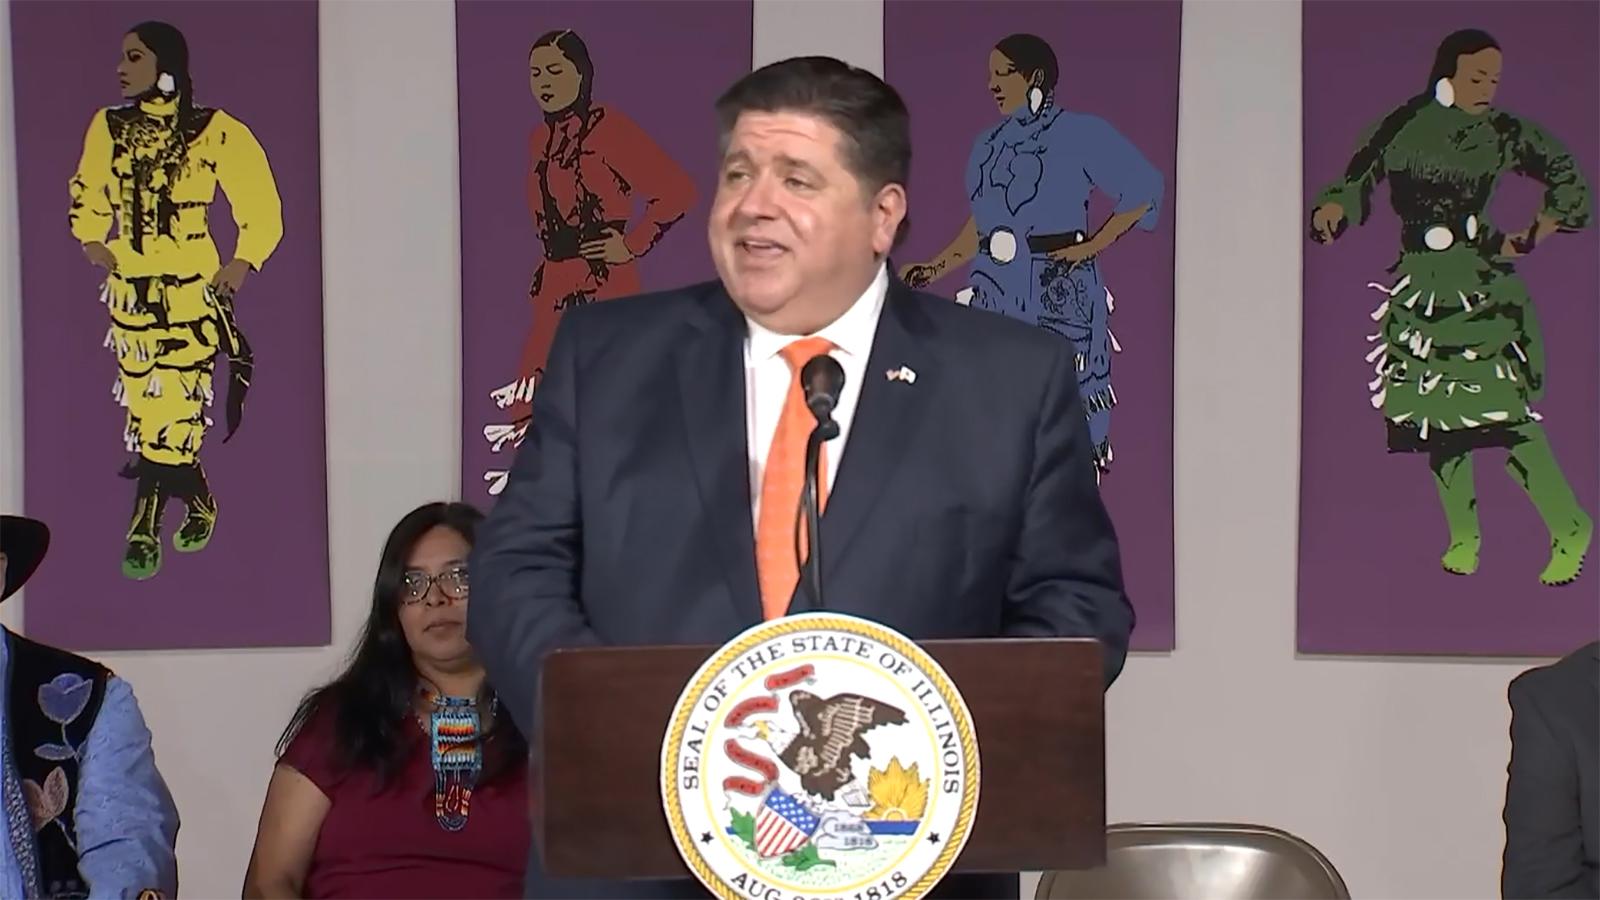 Gov. J.B. Pritzker speaks at a bill signing ceremony in Chicago Aug. 4, 2023, before signing three measures extending cultural protections to Native Americans in Illinois and requiring the teaching of Native American history in public schools. (Credit: Illinois.gov)